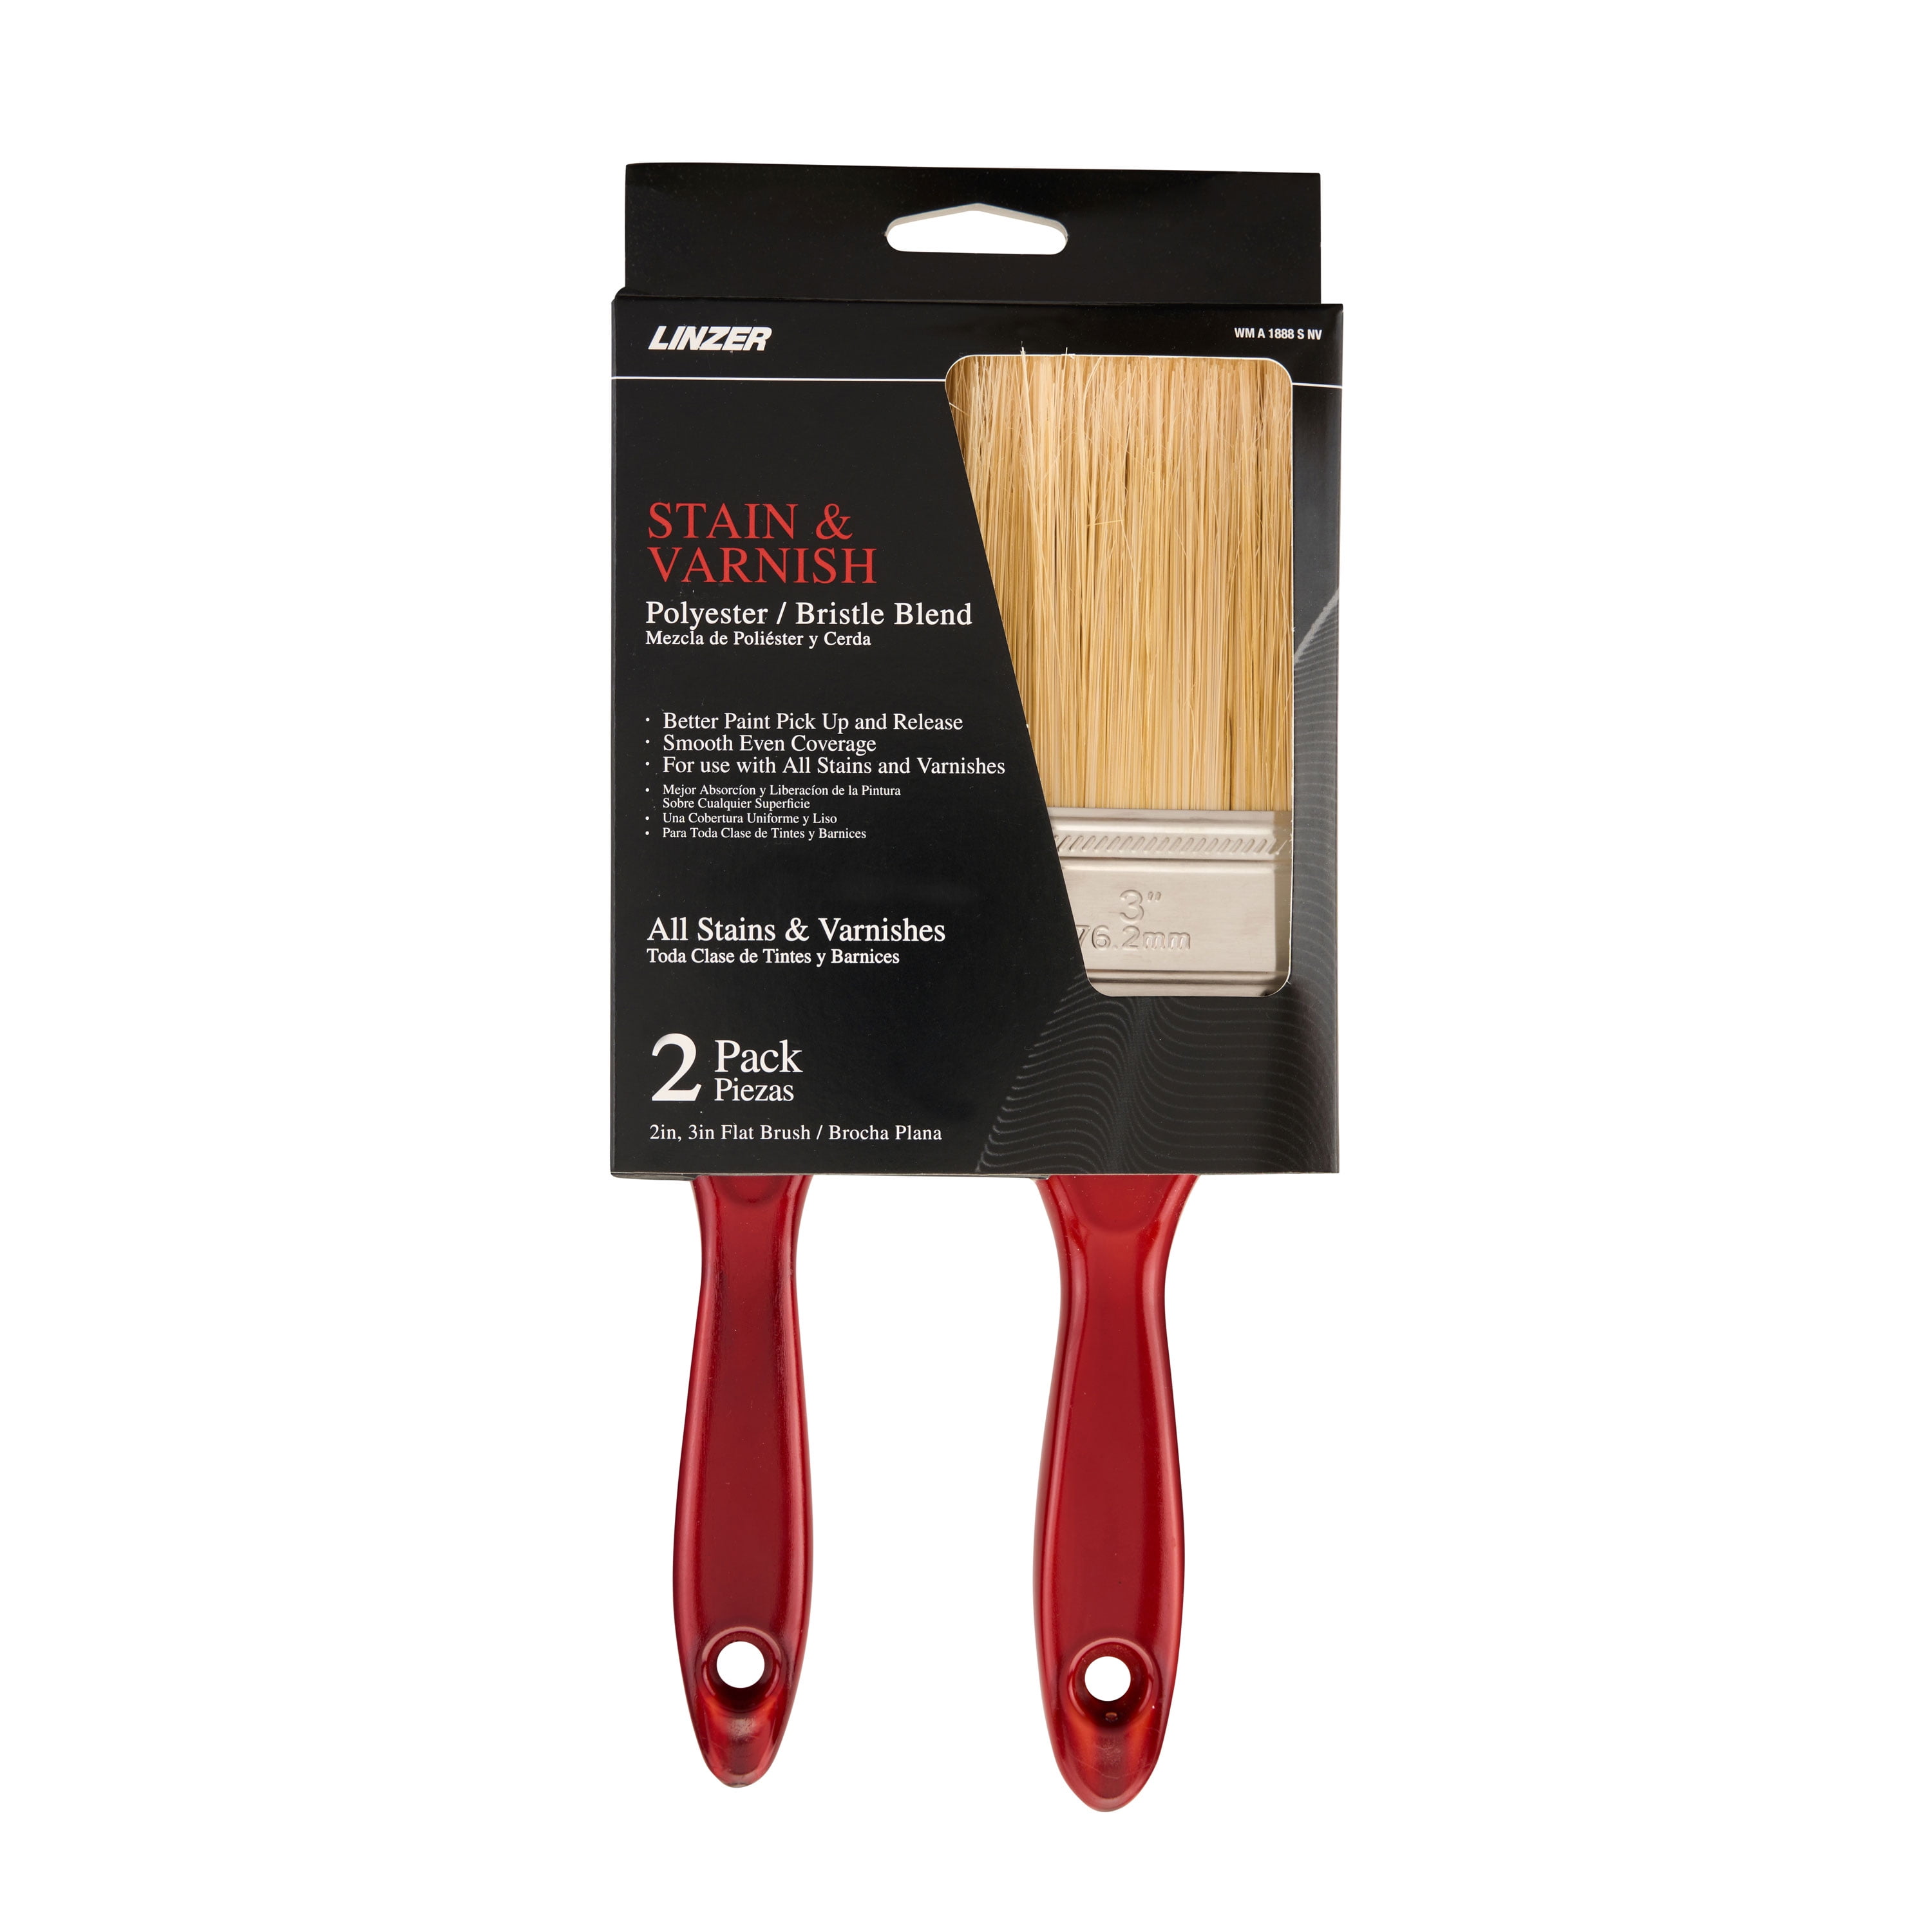 Wholsale Pricing Polyester Paint Brushes - Mazer Wholesale, Inc.